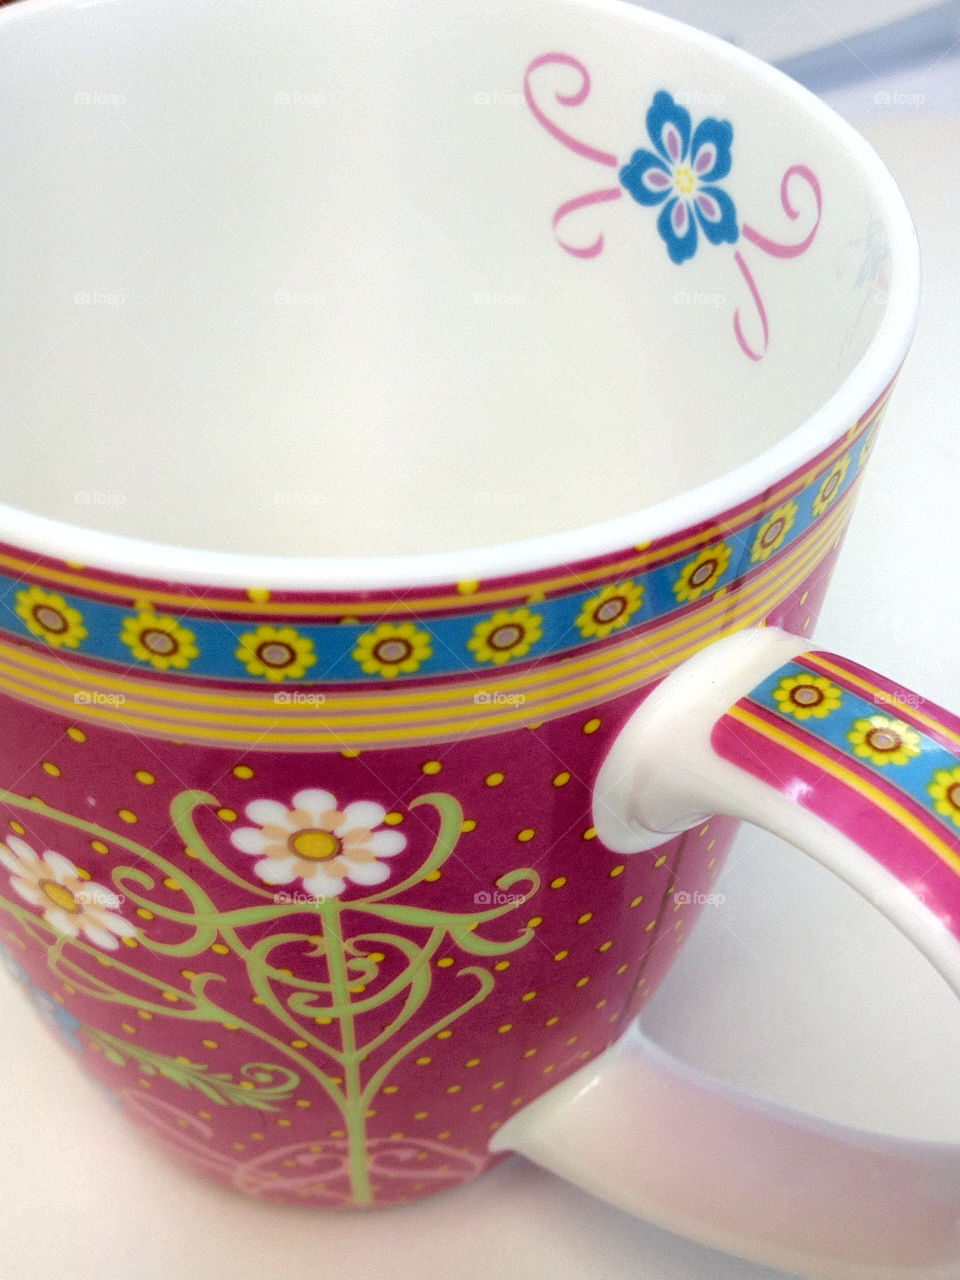 flower cup china drink by cataana